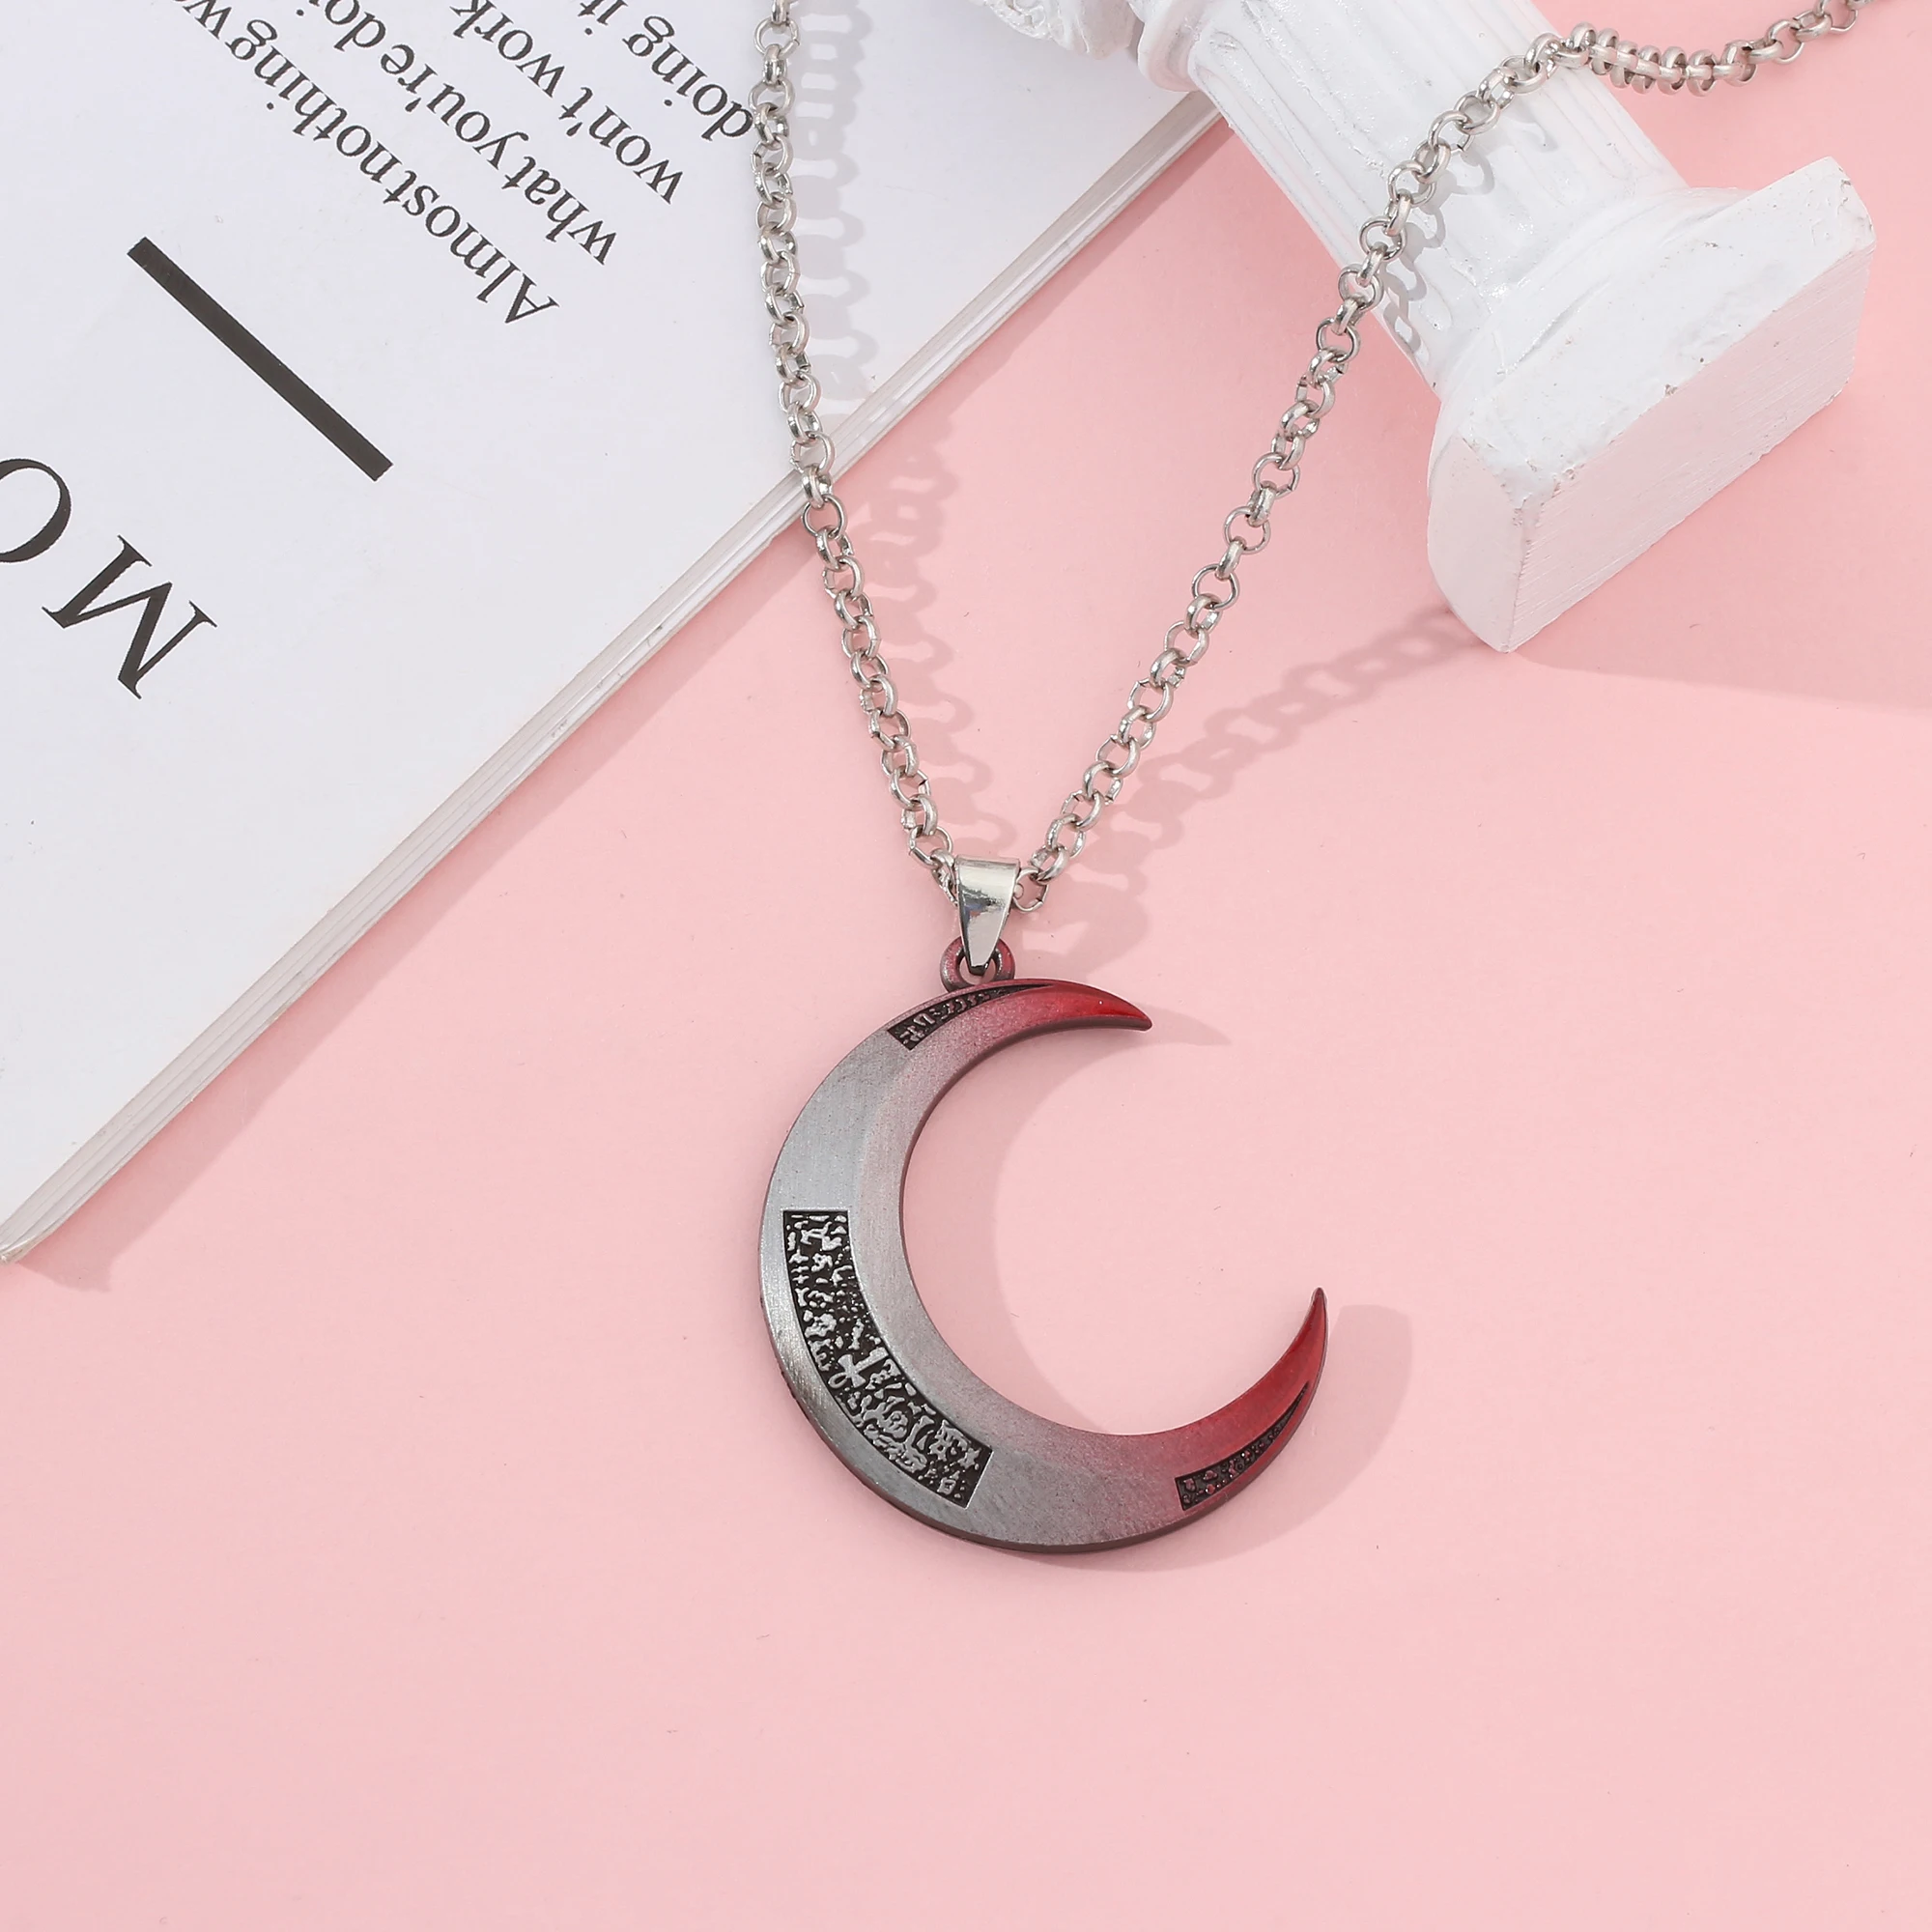 

Marvel Superhero Moon Knight Necklace The Avengers Marc Spector Jewelry Crescent Dart Pendant Necklaces Cosplay Accessories